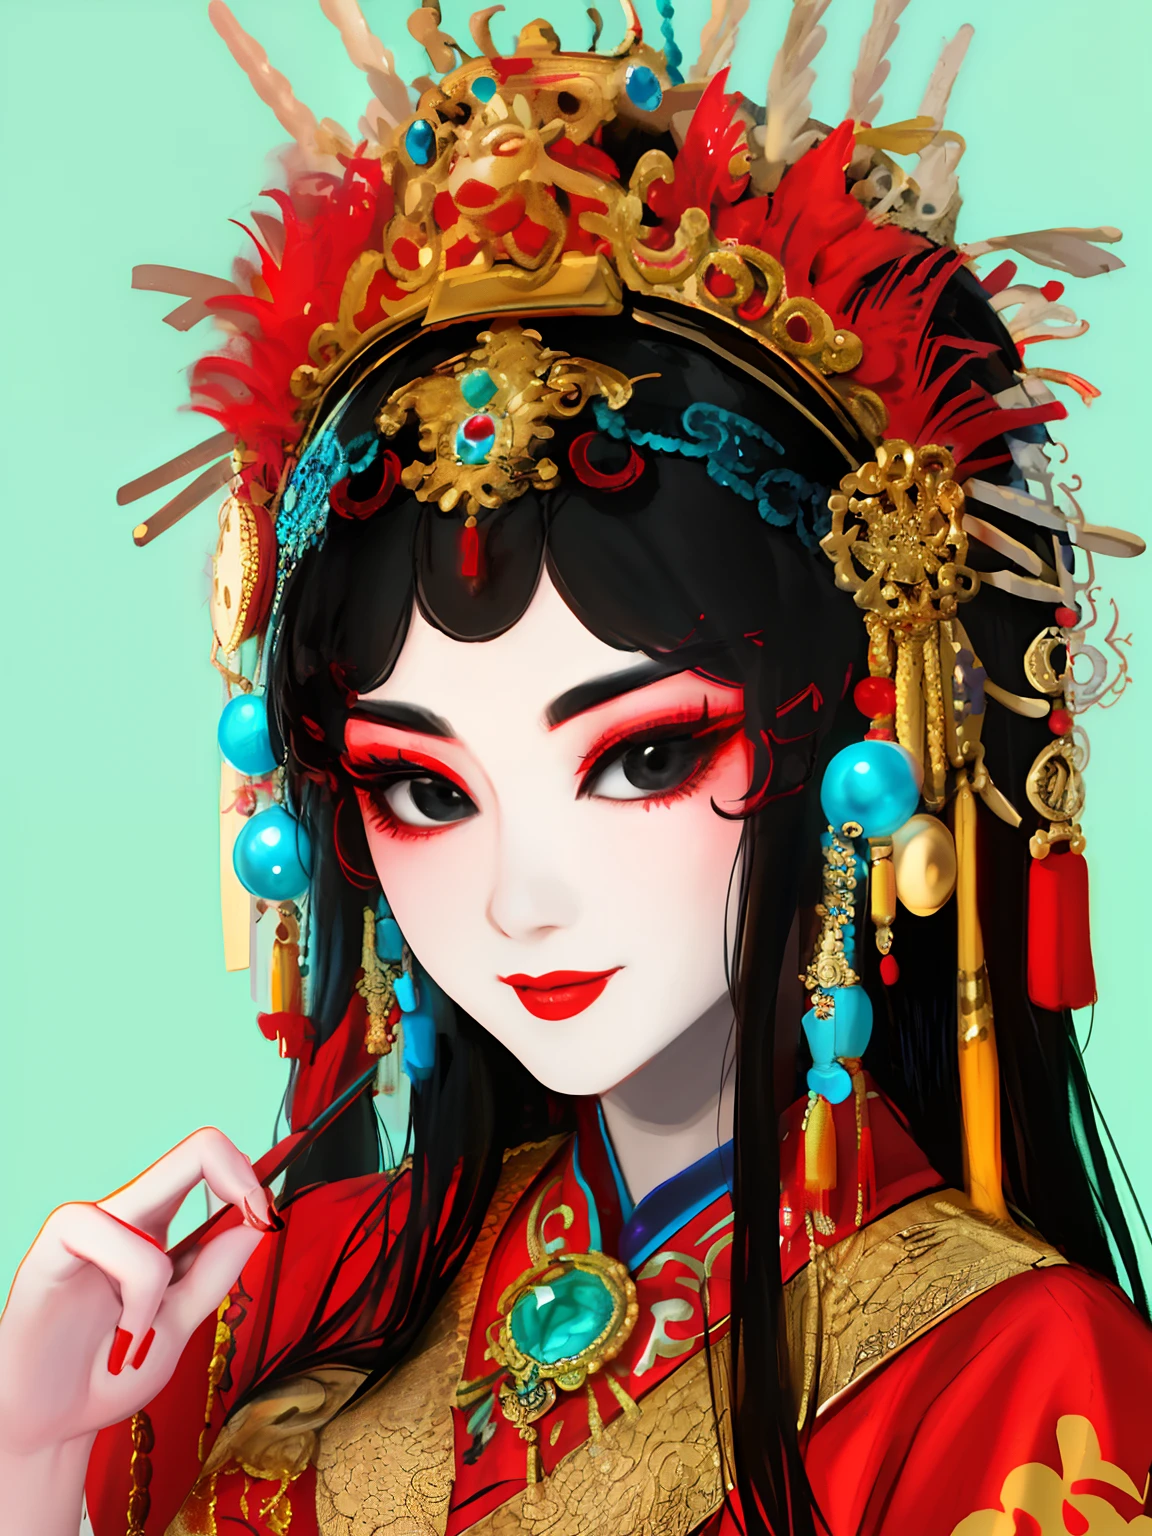 （（（tmasterpiece））），high detal，The is very detailed，CG，8K，Wallpapers，clothes_beijing opera_QY，1girll，Peking Opera Mulan shape， Delicate headgear，Set with precious stones and gold jewelry，Jinbu shook，Black hair，  light make-up， Jujube red lips， hair adornments， In the cool garden， sportrait， looking at viewert， ssmile， simple backgound， Keep one's mouth shut， florals，Lattice window，Photorealistic photography，sunlighting， Black eyes with spirit，